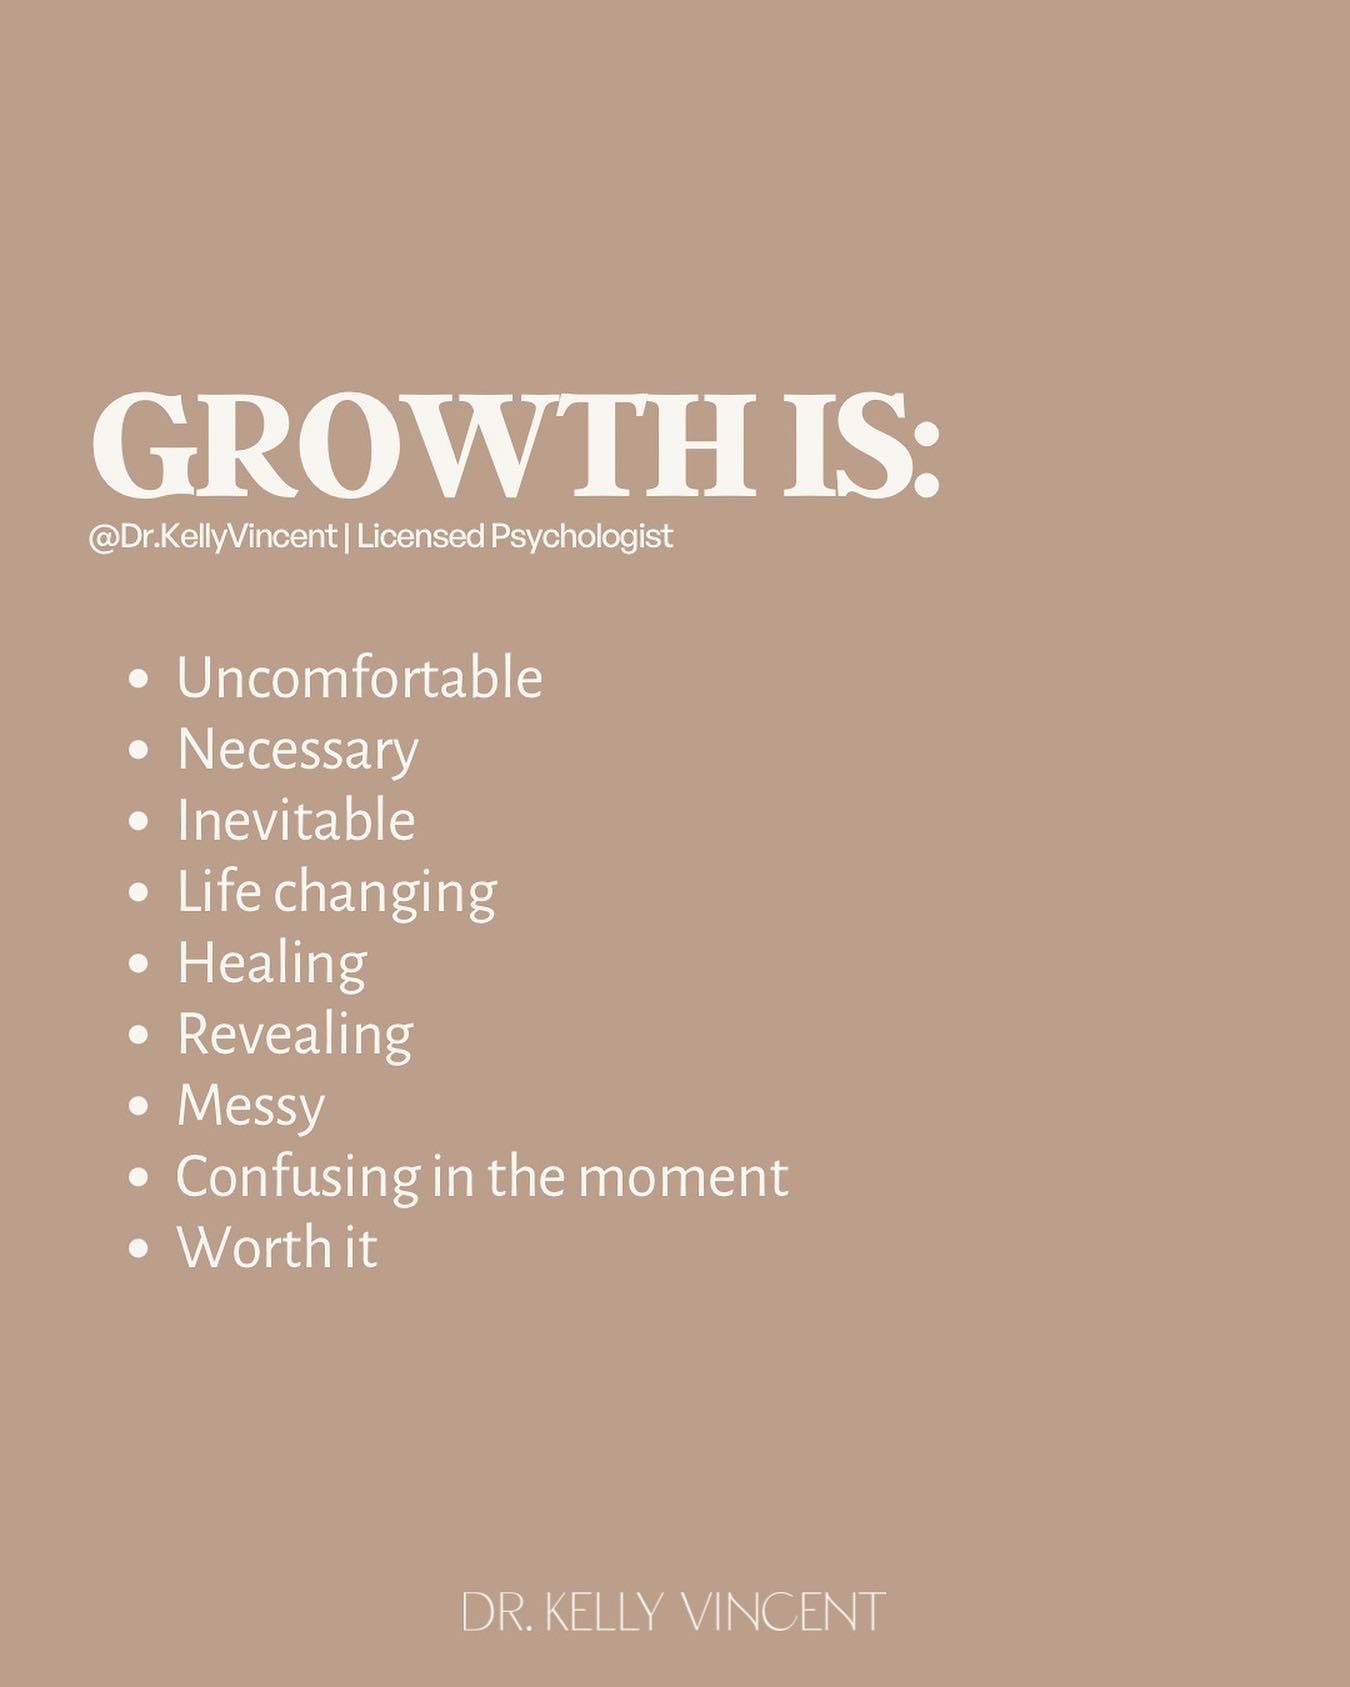 If you are currently in the midst of healing, ❤️&zwj;🩹remember that growth can be ALL the things. 

It often includes layers📚 of emotions, with many ups, downs, twists, and turns. 🔁

Allow yourself the space 🧘🏼&zwj;♀️you need to gently work your